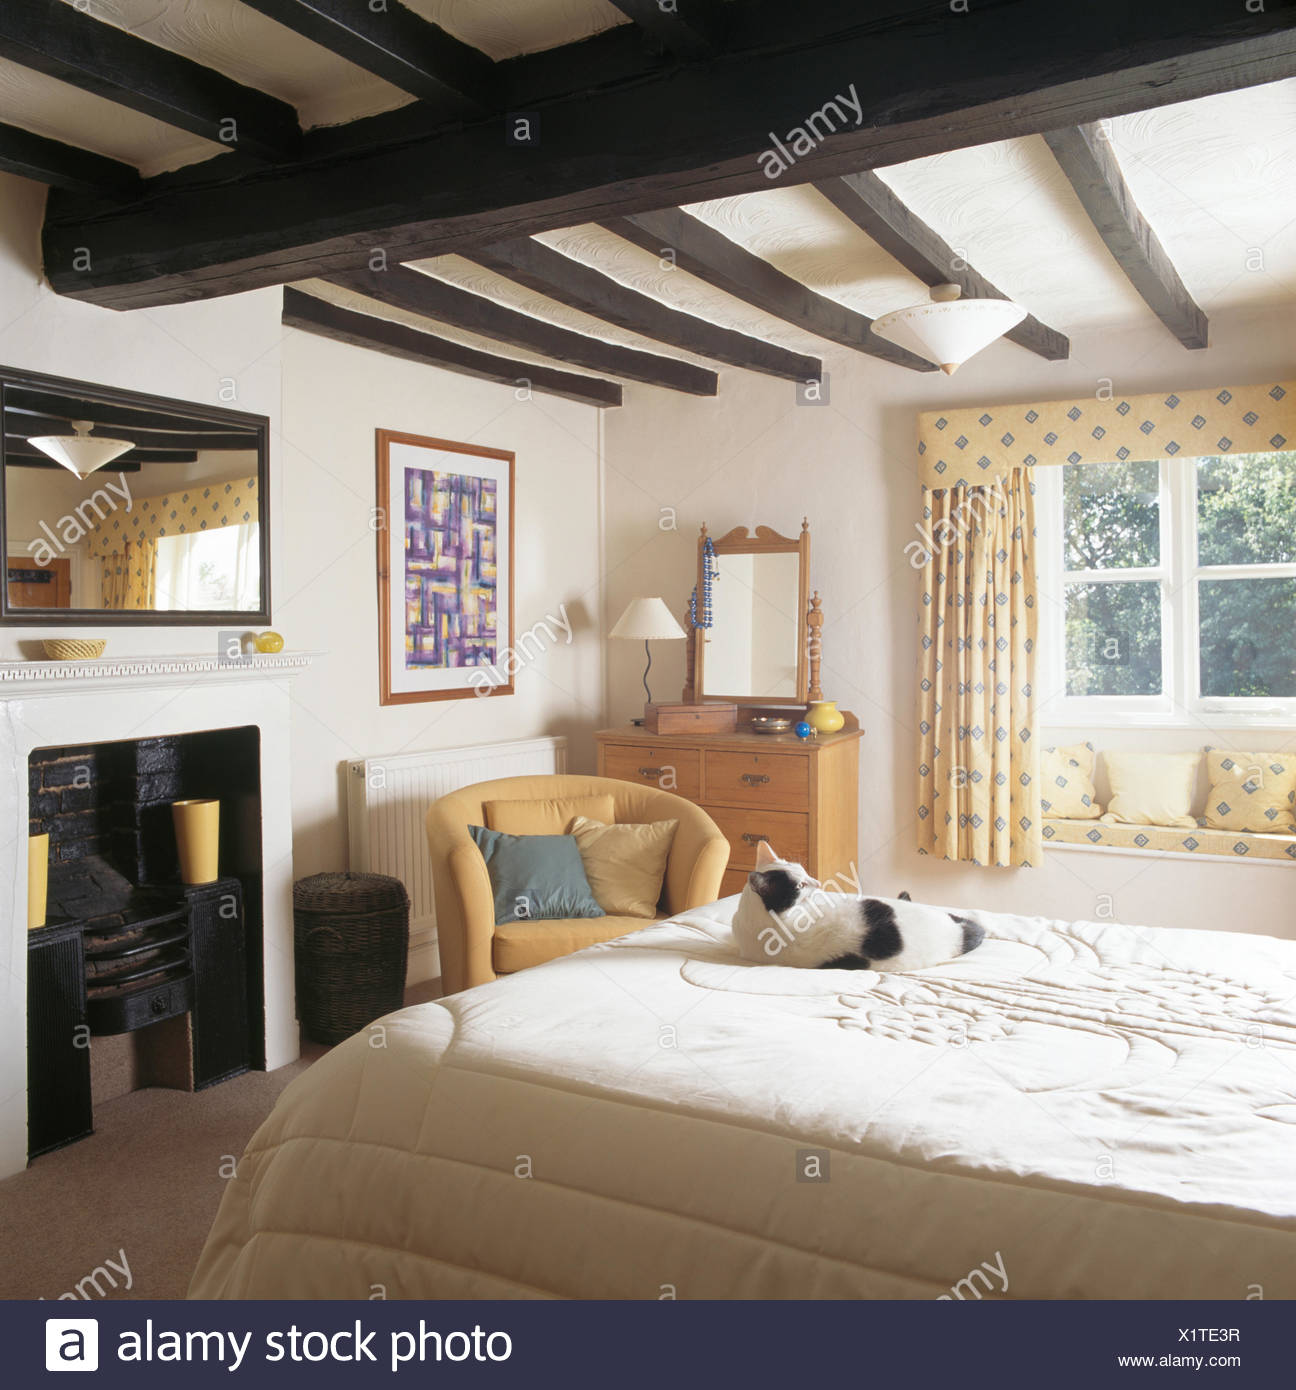 Black White Cat Sitting On On Bed In Cottage Bedroom With Black